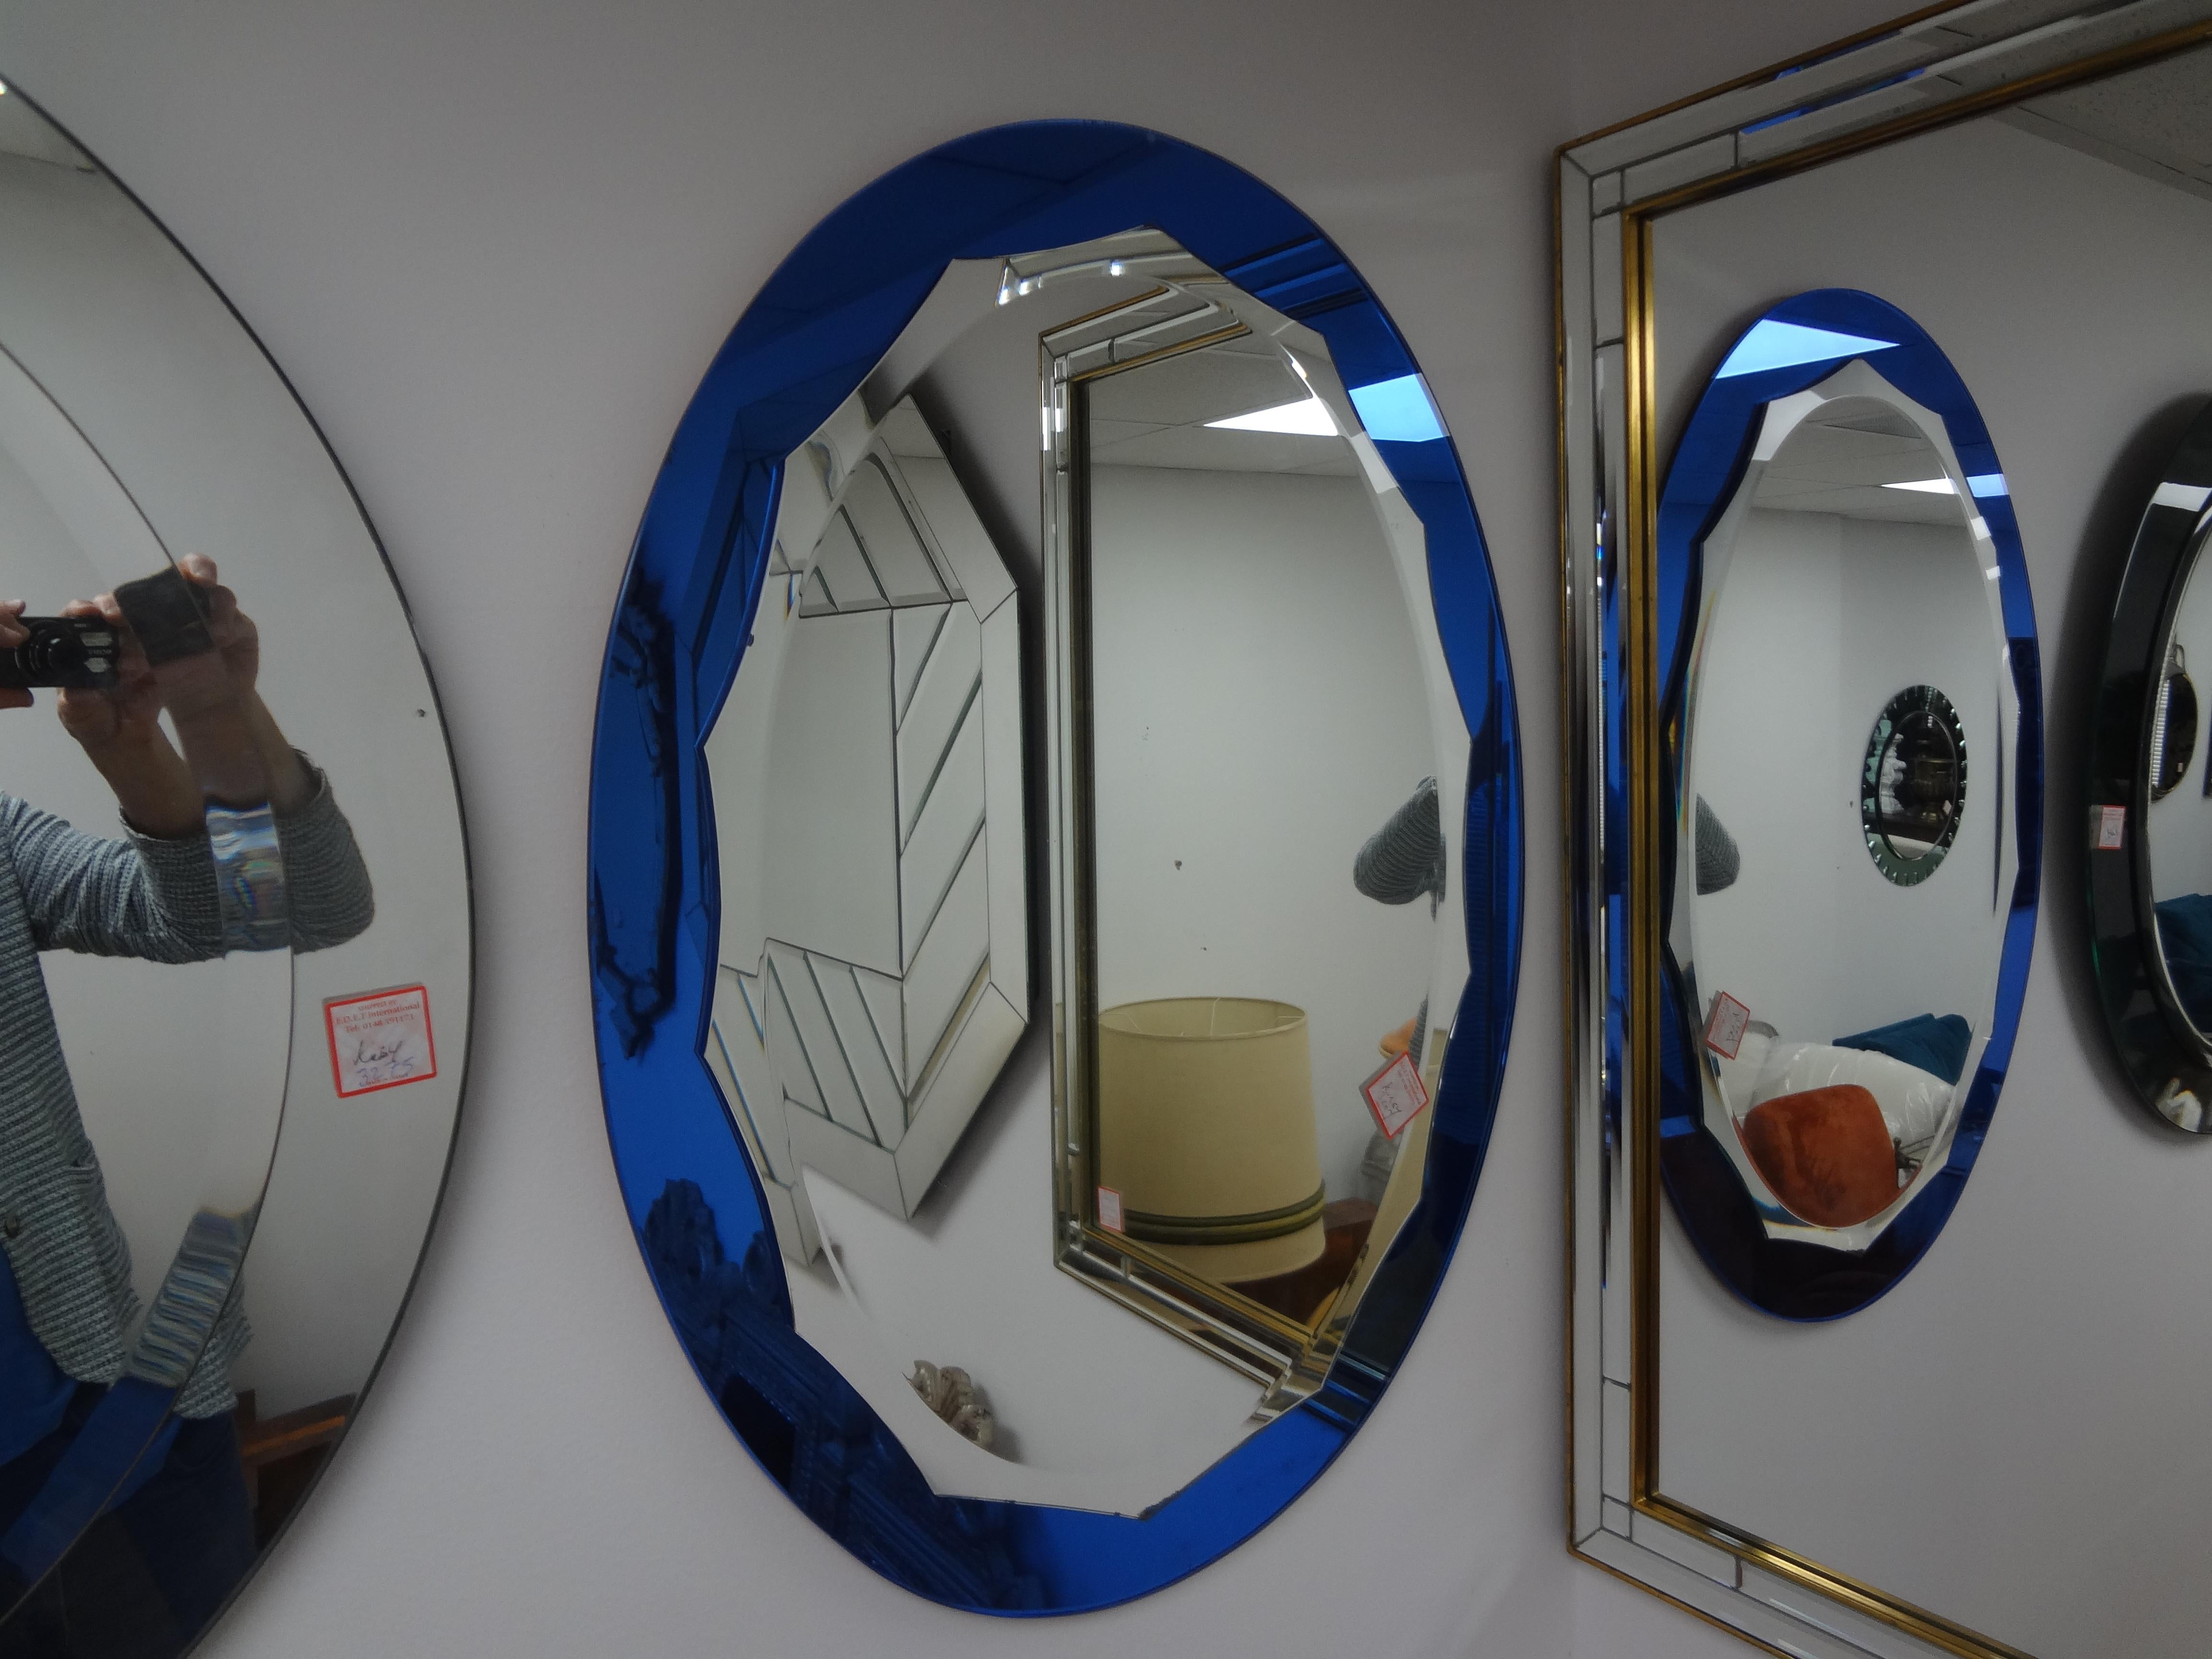  Italian Modern Blue Fontana Arte Style Beveled  Mirror .
This stylish Italian mid century oval mirror has a cobalt blue mirrored exterior with a scalloped silver beveled interior mirror.
Great Italian modern design and perfect for a powder room or